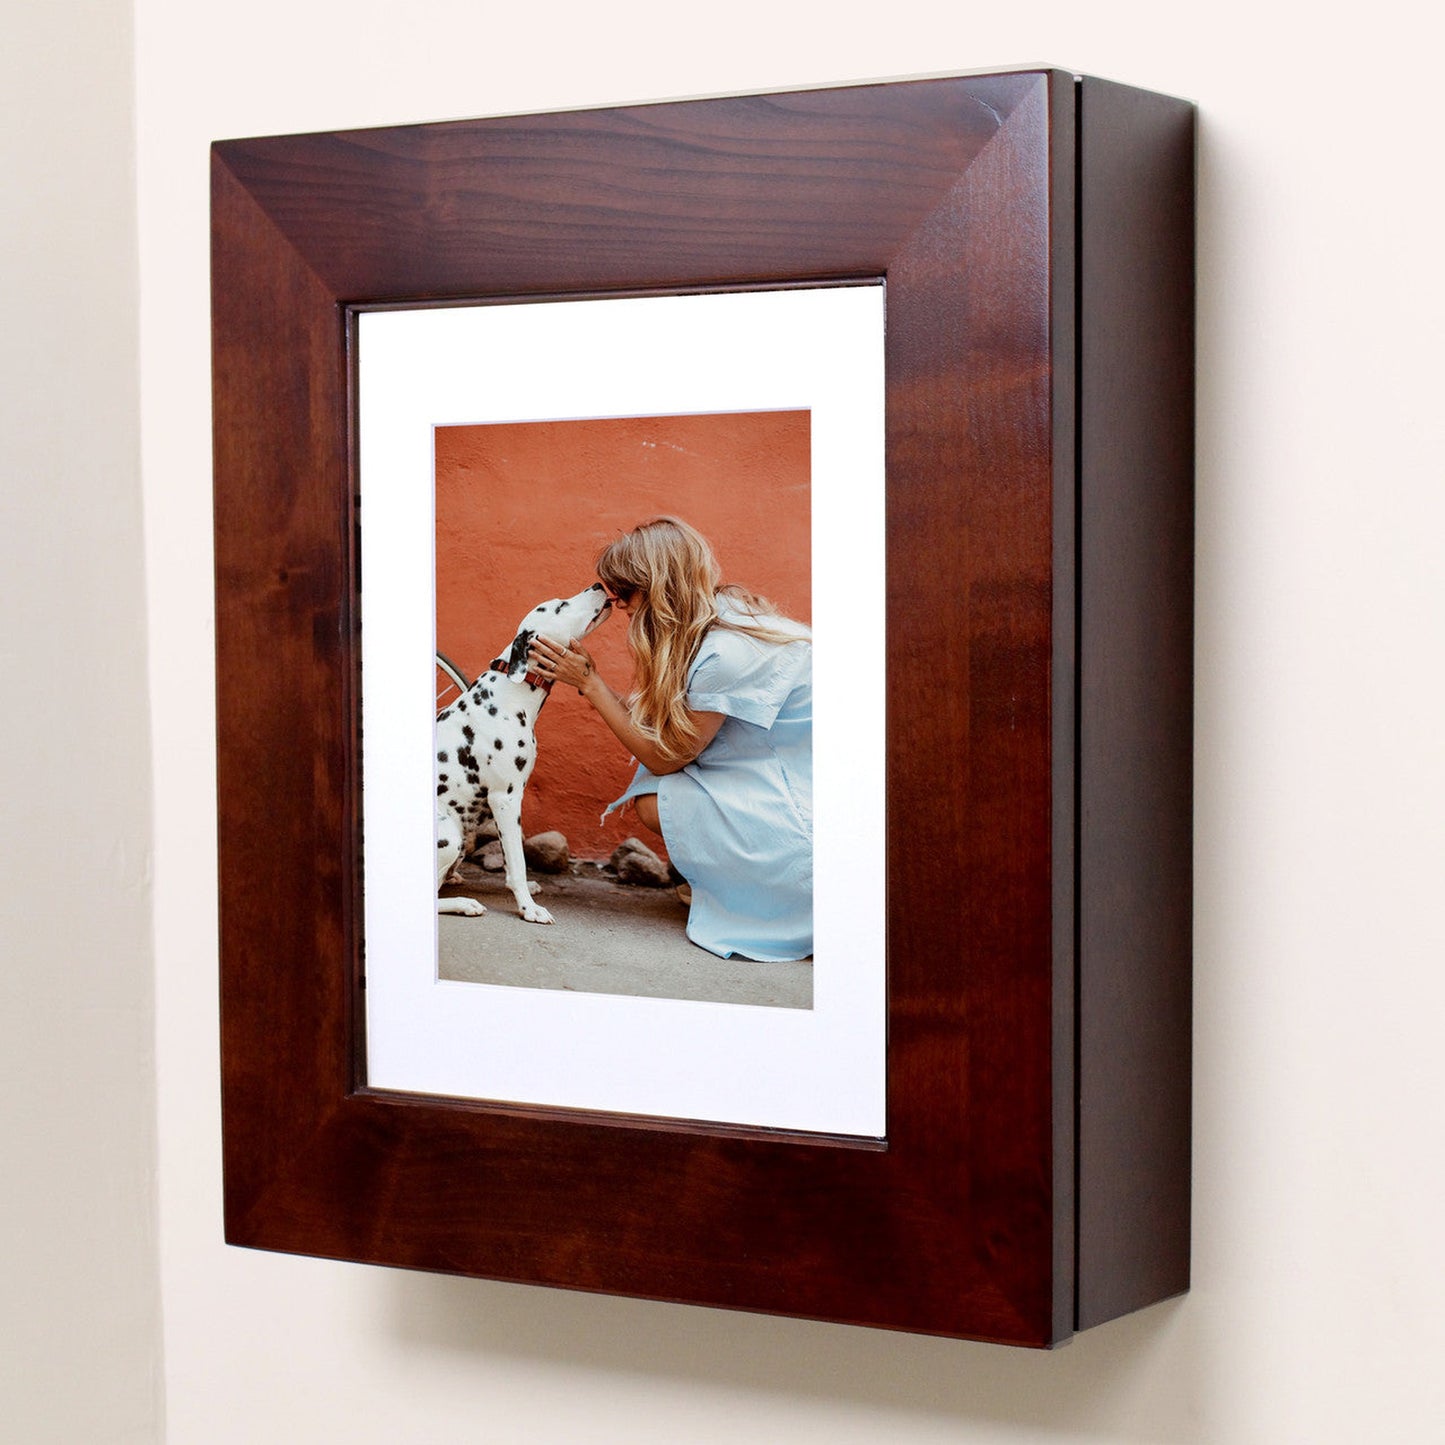 Fox Hollow Furnishings 20" x 17" Espresso Wall Mount Picture Frame Medicine Cabinet With Black 8" x 10" Matting